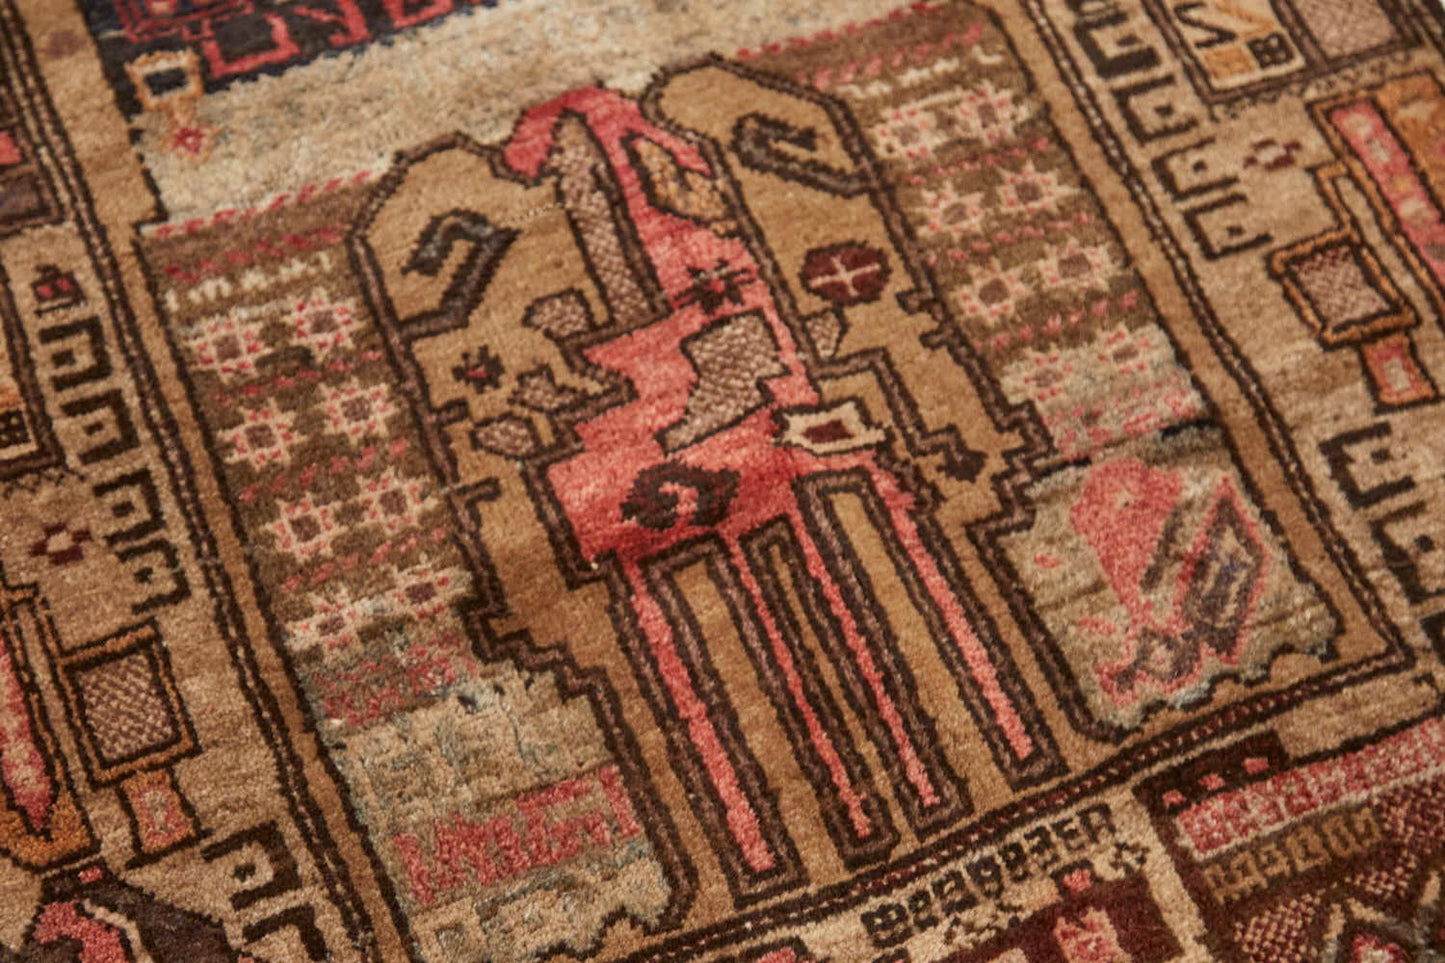 Vintage Afghan War Rug with earthy tones, tan base with brown and pink designs, beautiful details for office, kitchen or living room rug - Available from King Kennedy Rugs Los Angeles